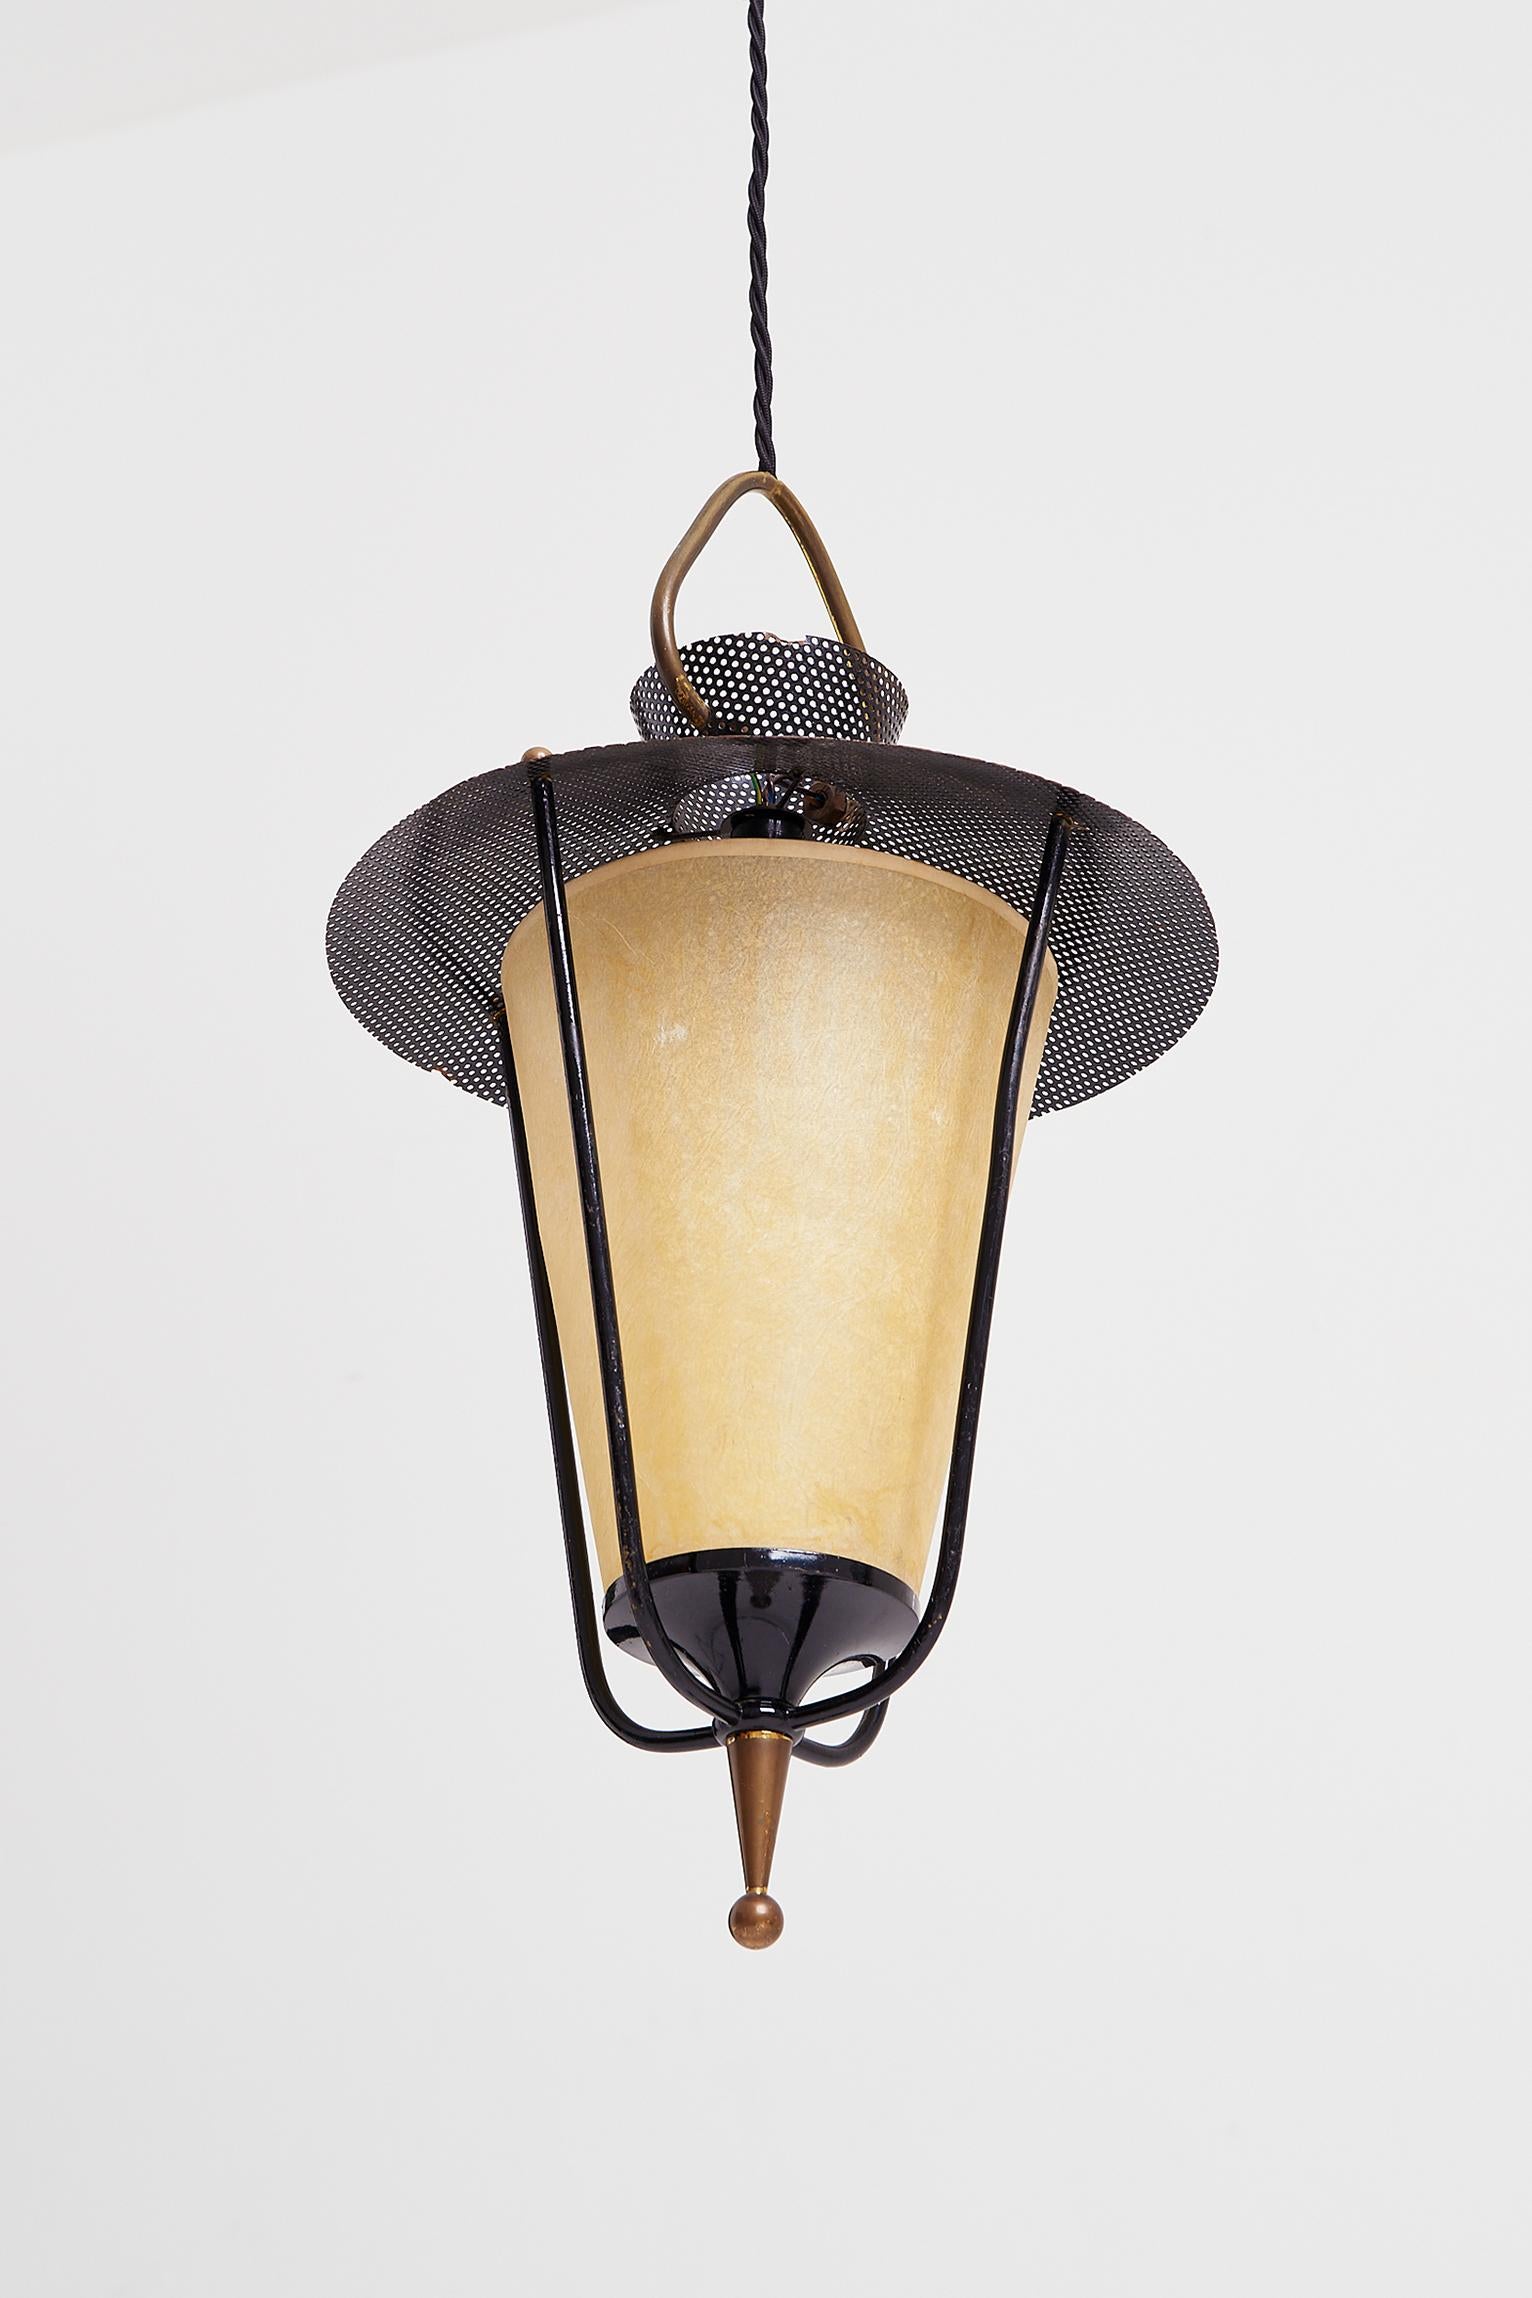 French Mid-Century Lantern by Maison Lunel